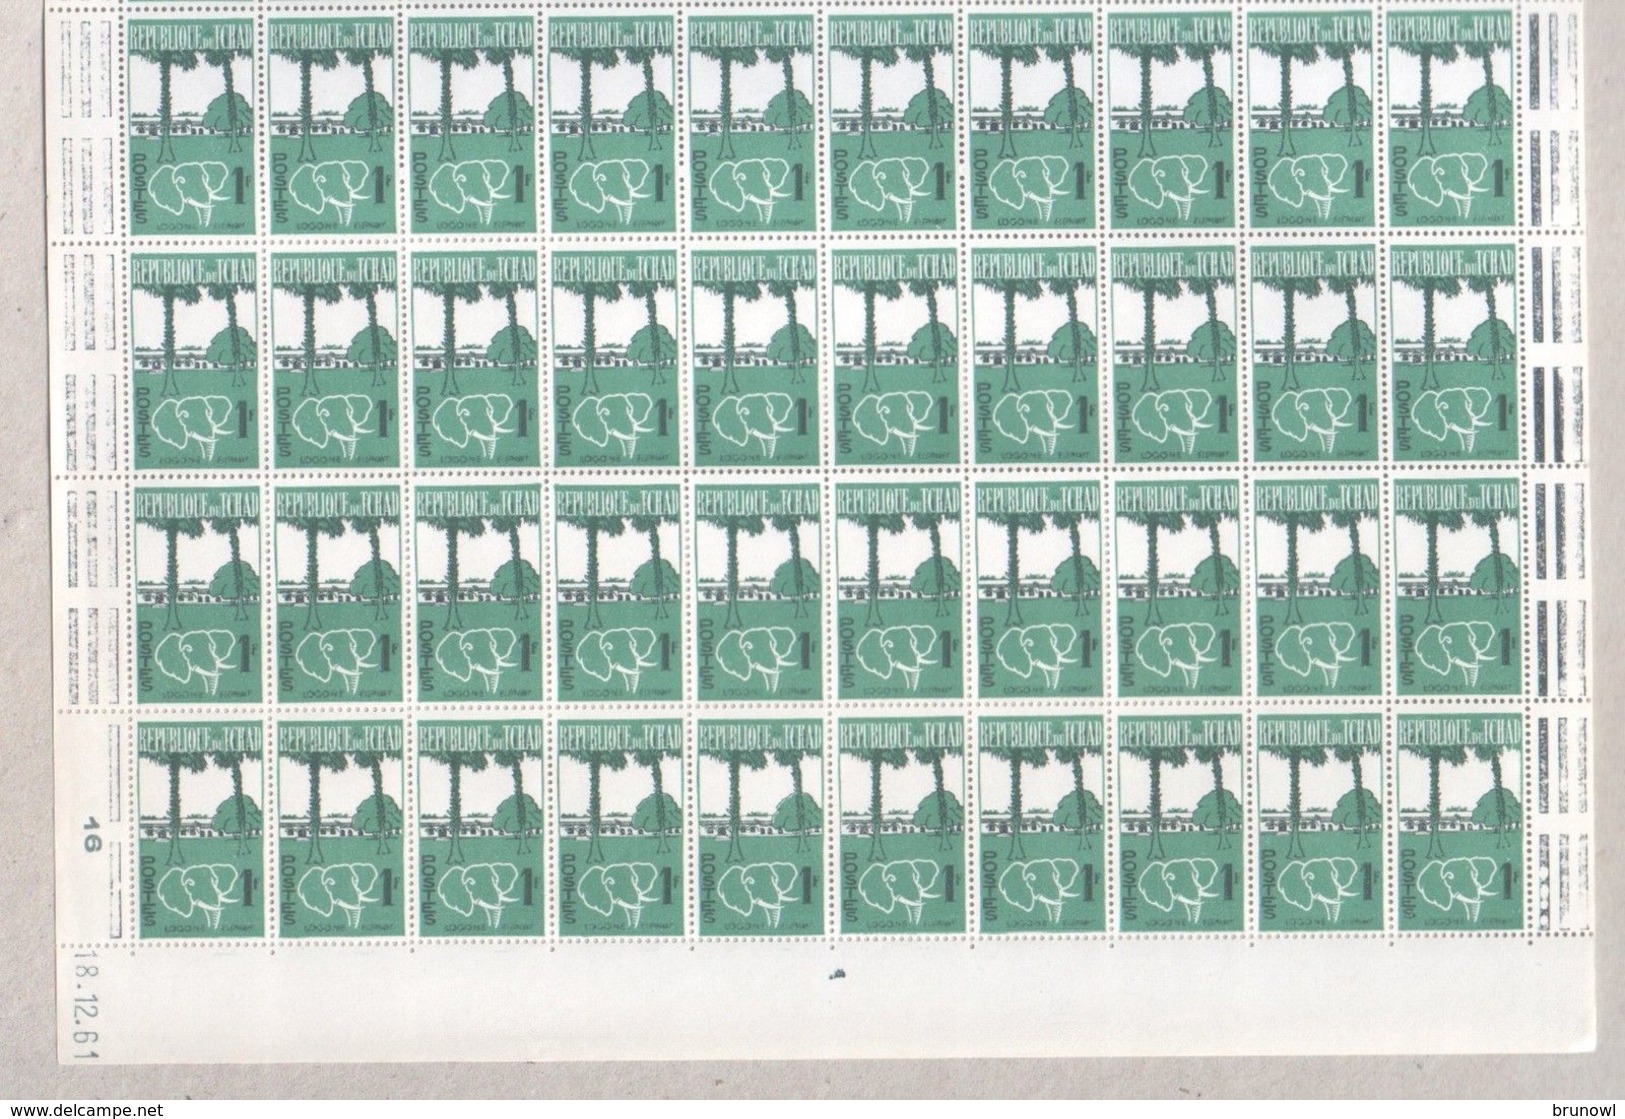 Chad MNH Sheet Of 1962 1F Elephant And Lagoon Stamps - Tschad (1960-...)